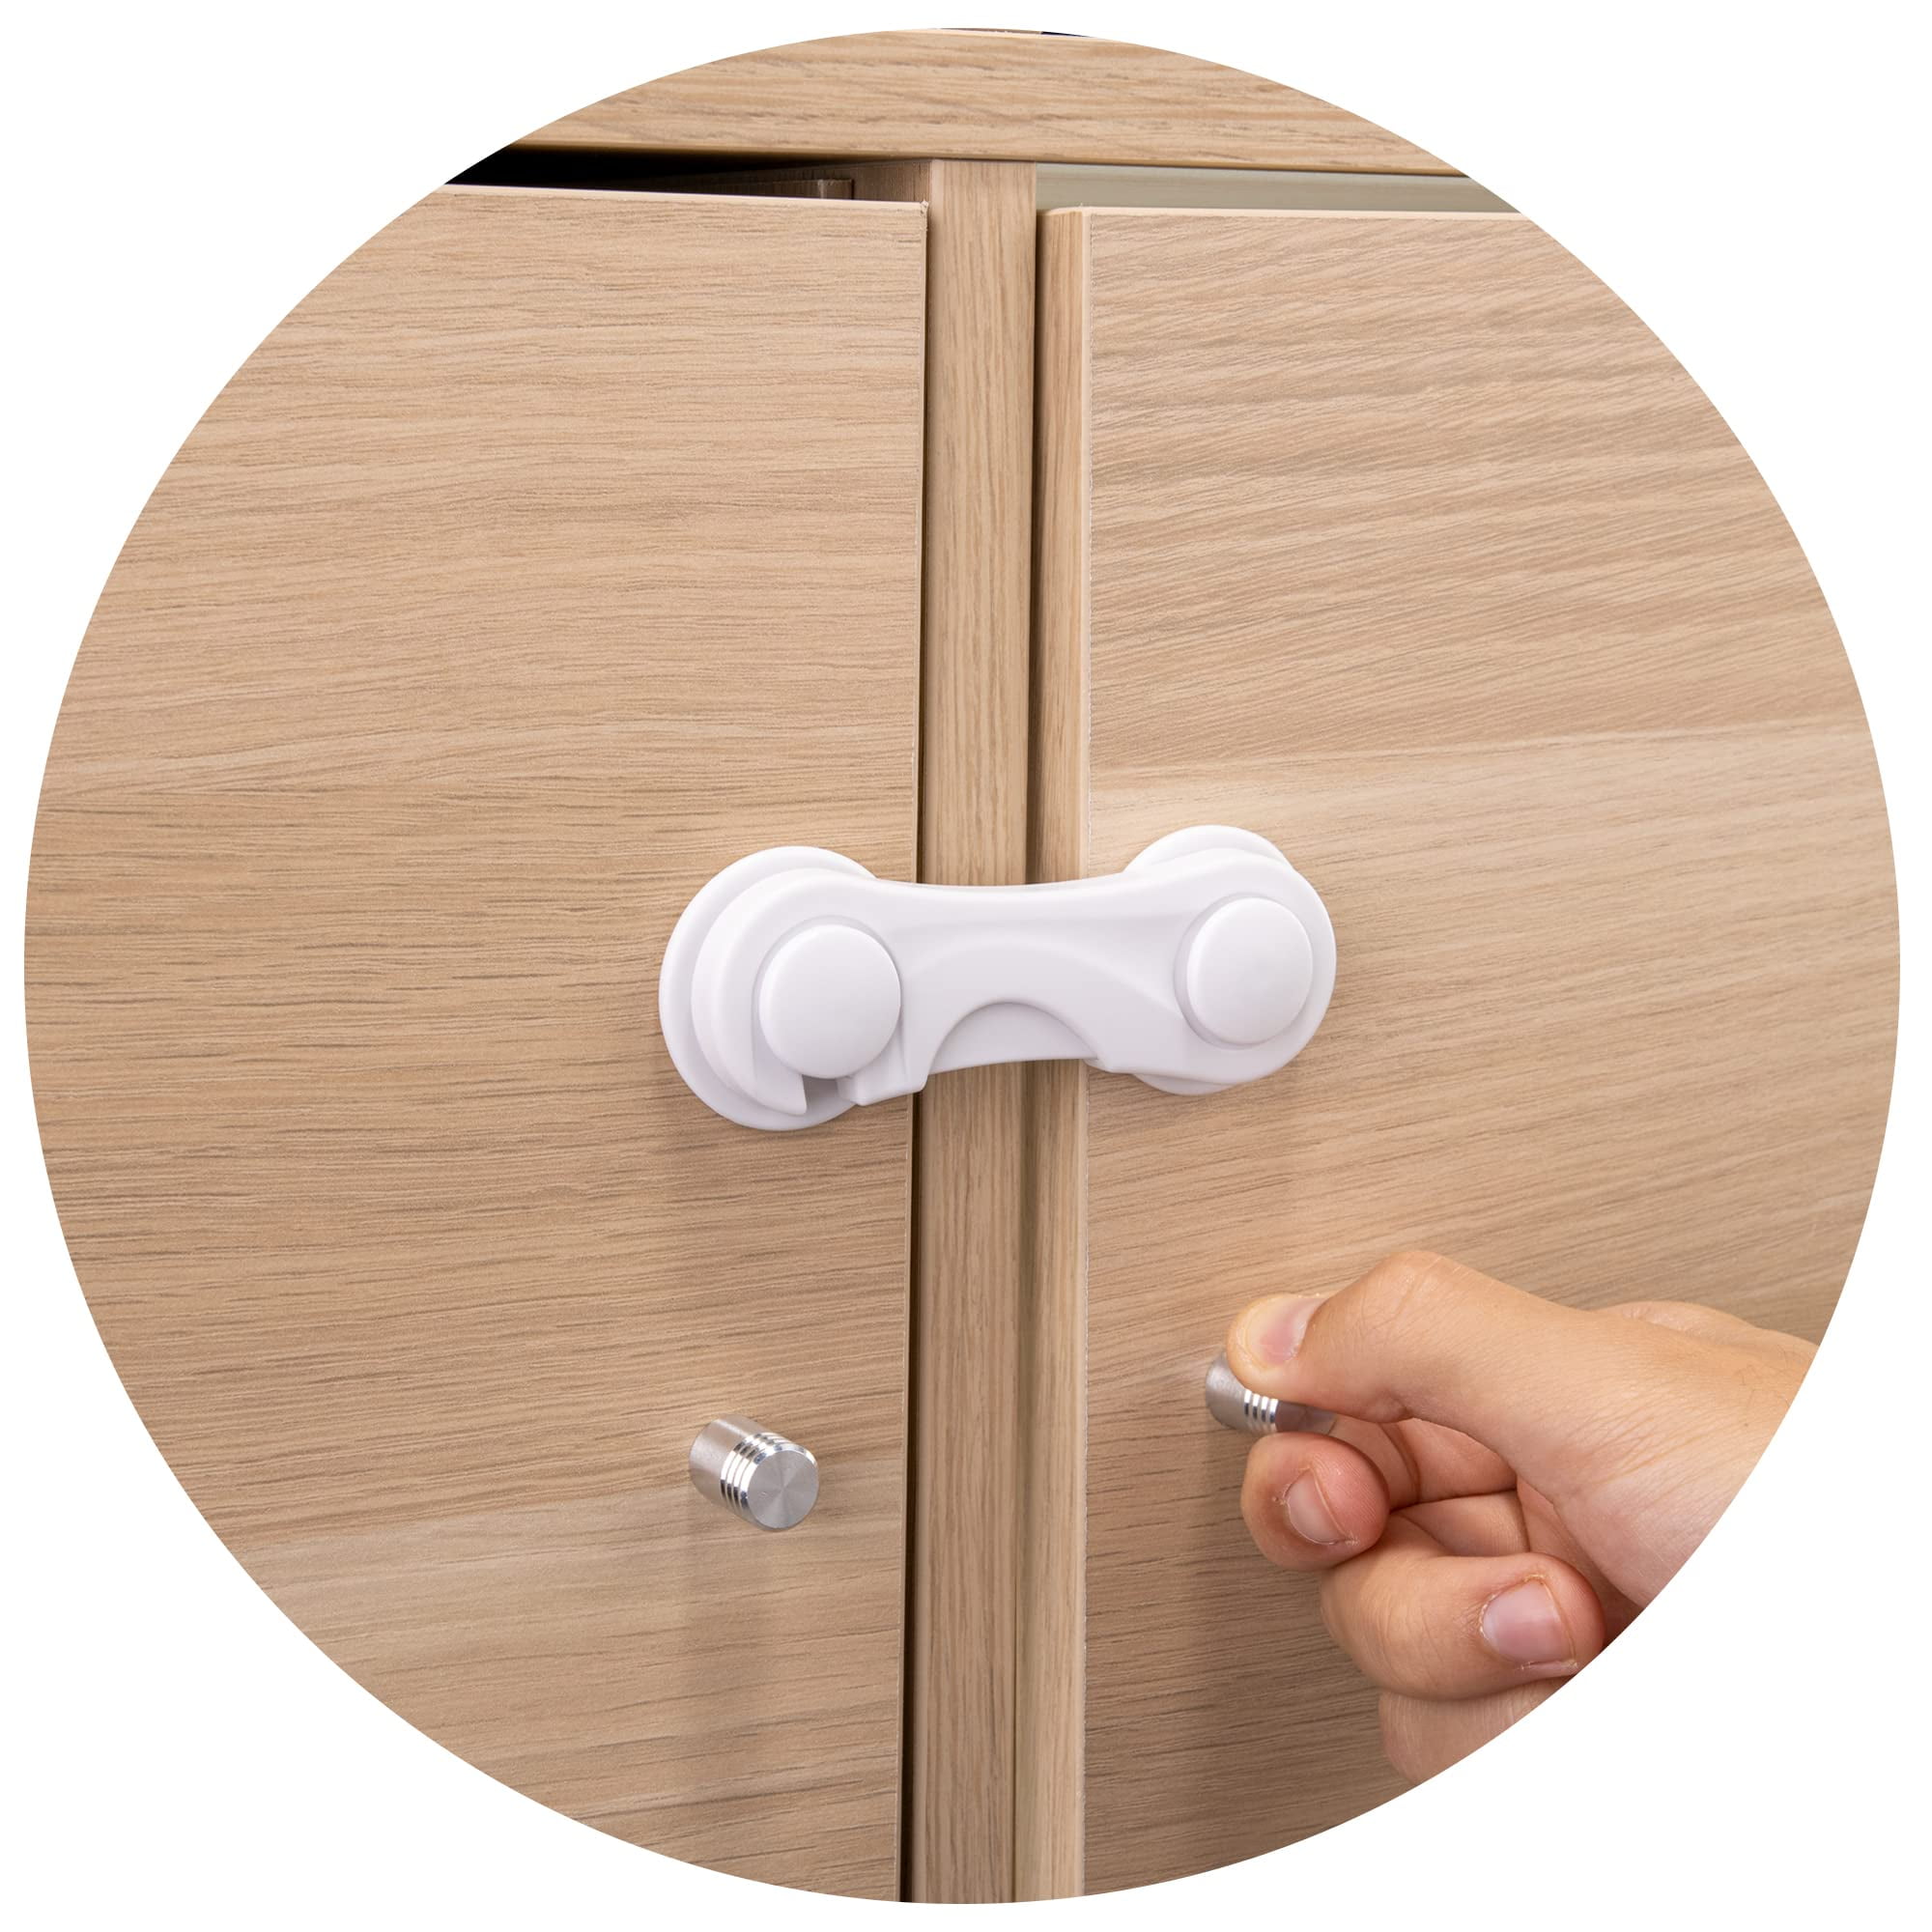 Drawers Child Safety Baby Proofing Locks for Cabinets Fridge Toilet Seat 